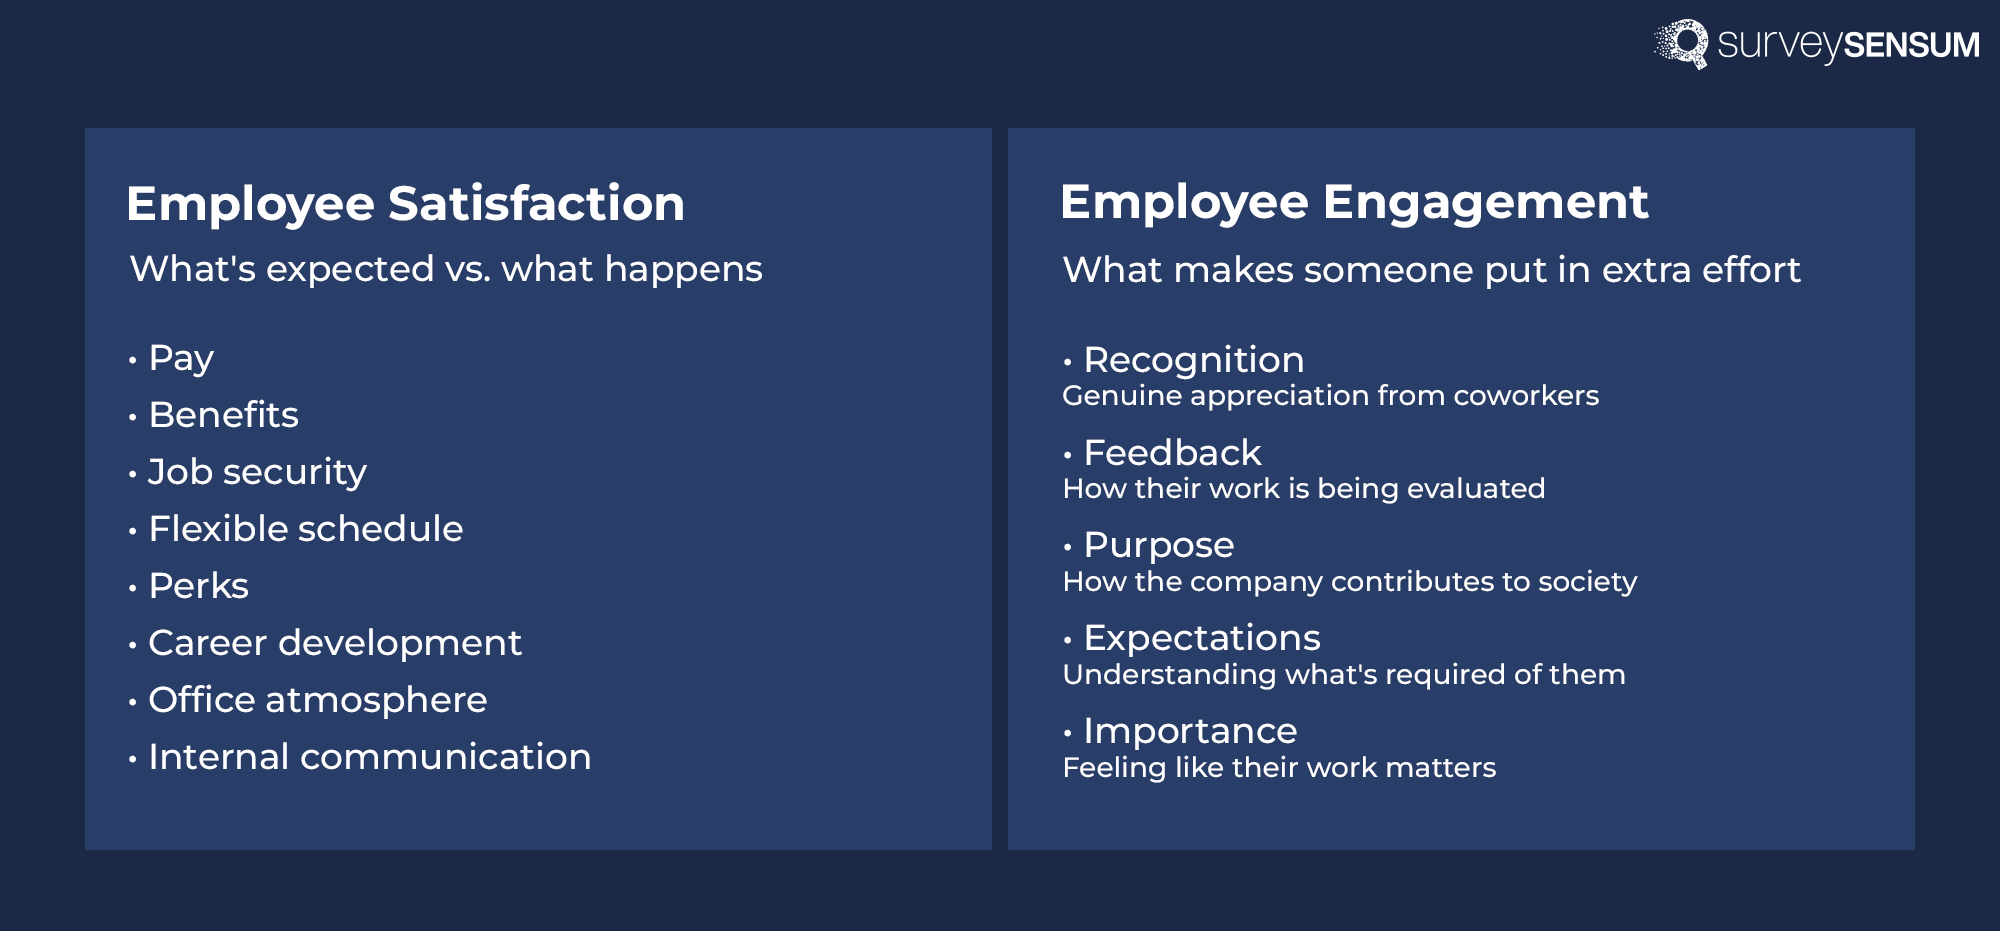 this is the image of Employee Satisfaction vs. Employee Engagement where the differences between employee satisfaction and engagment are listed